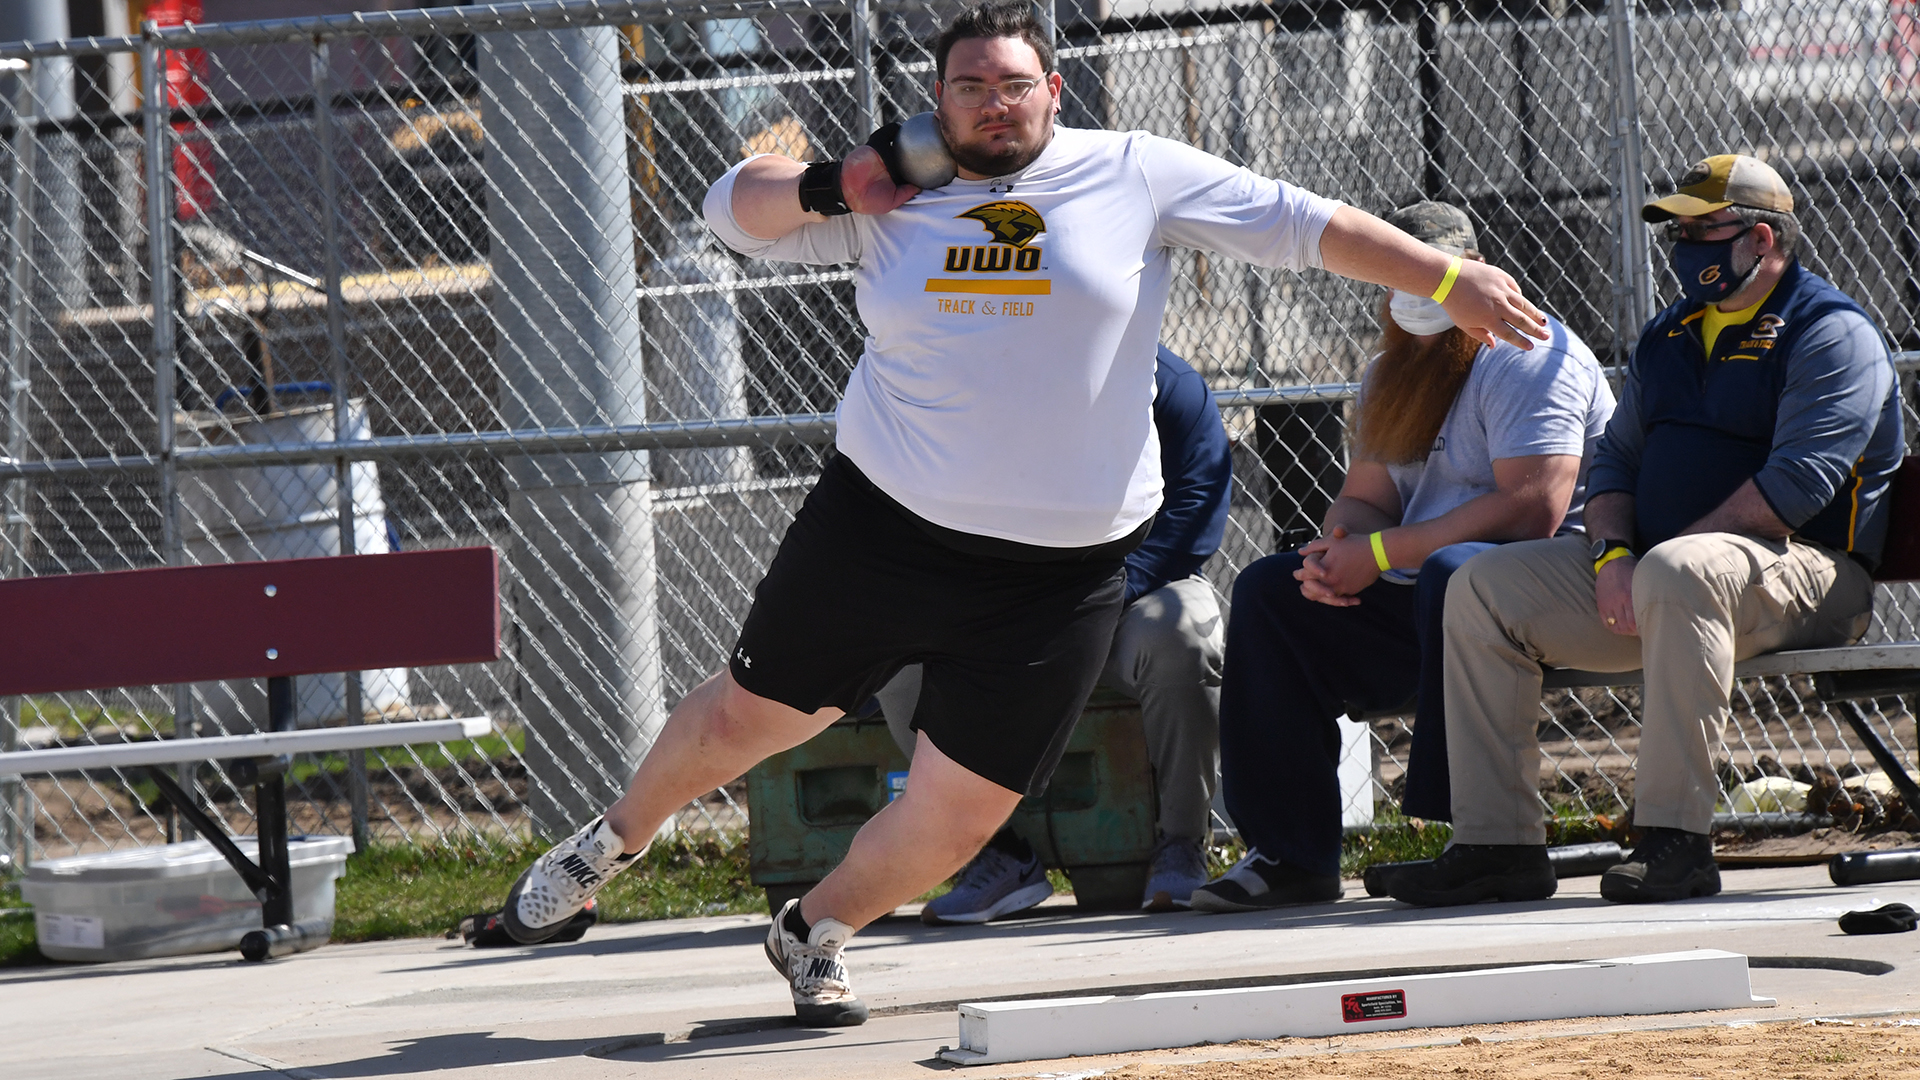 Jackson Sheckler won the shot put event at the UW-Platteville Pioneer Opener with a distance of 51-10 1/2.